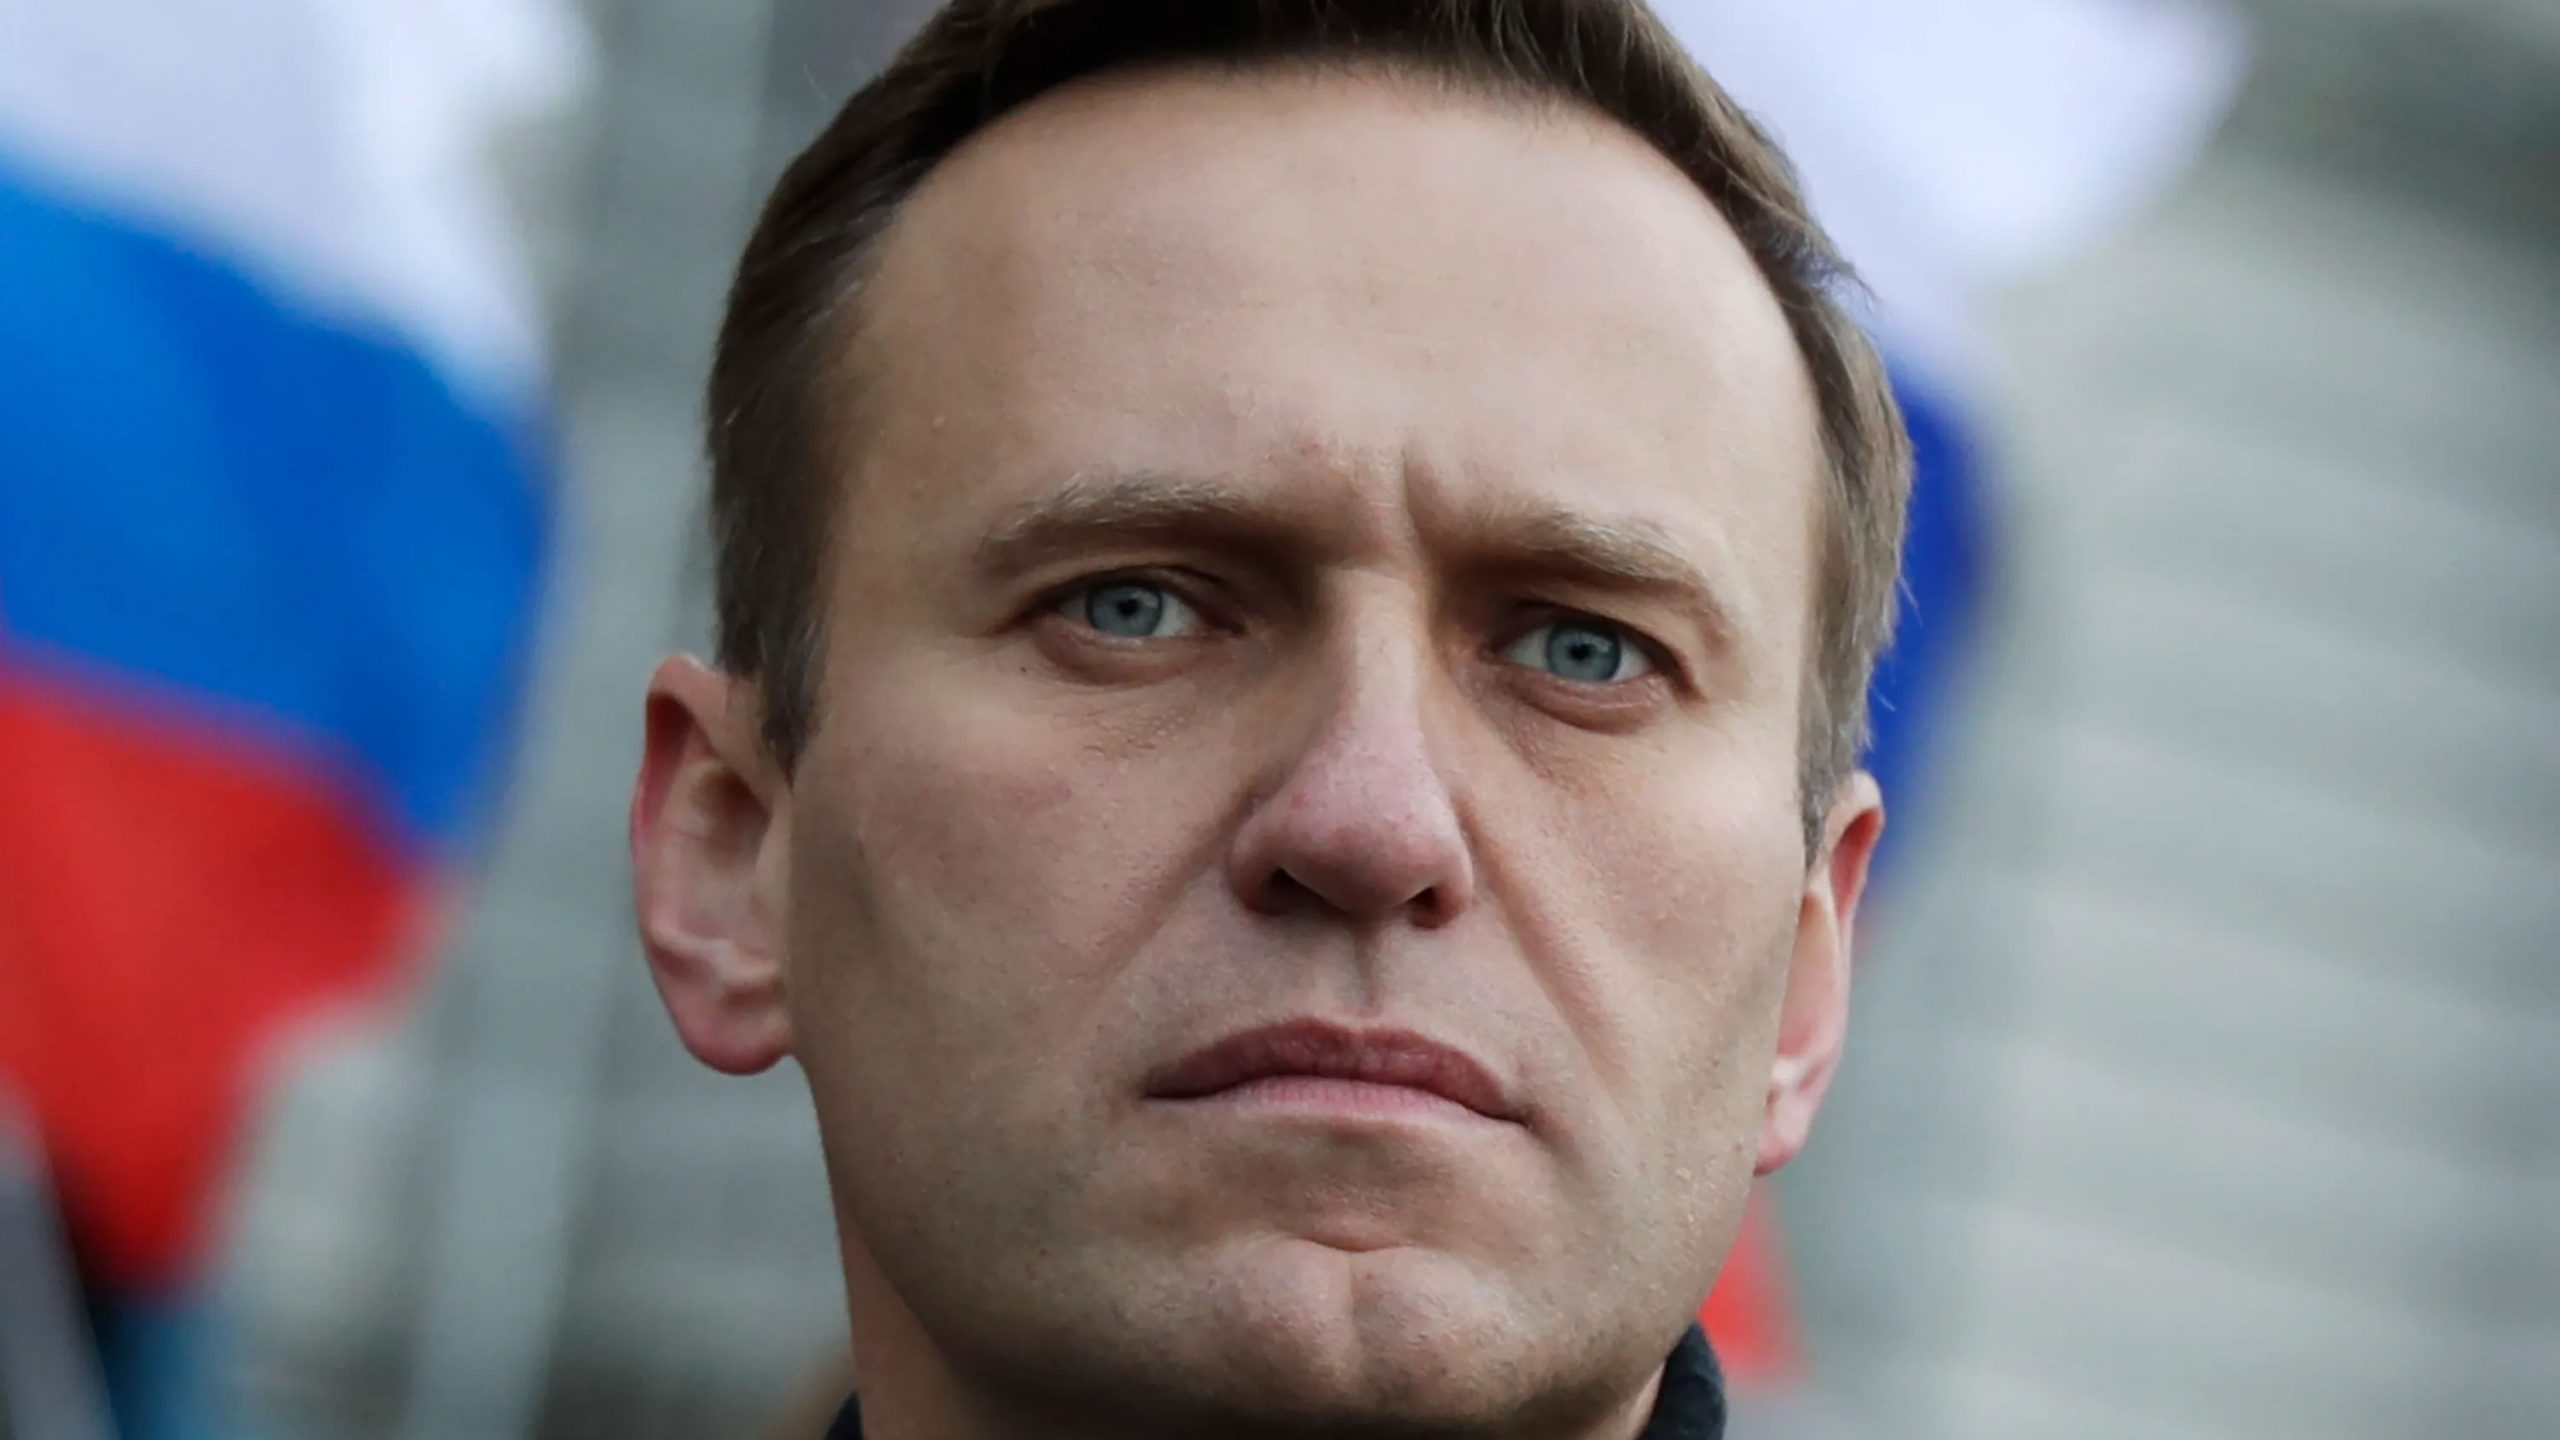 Russian opposition leader Alexei Navalny out of medically induced coma: Hospital